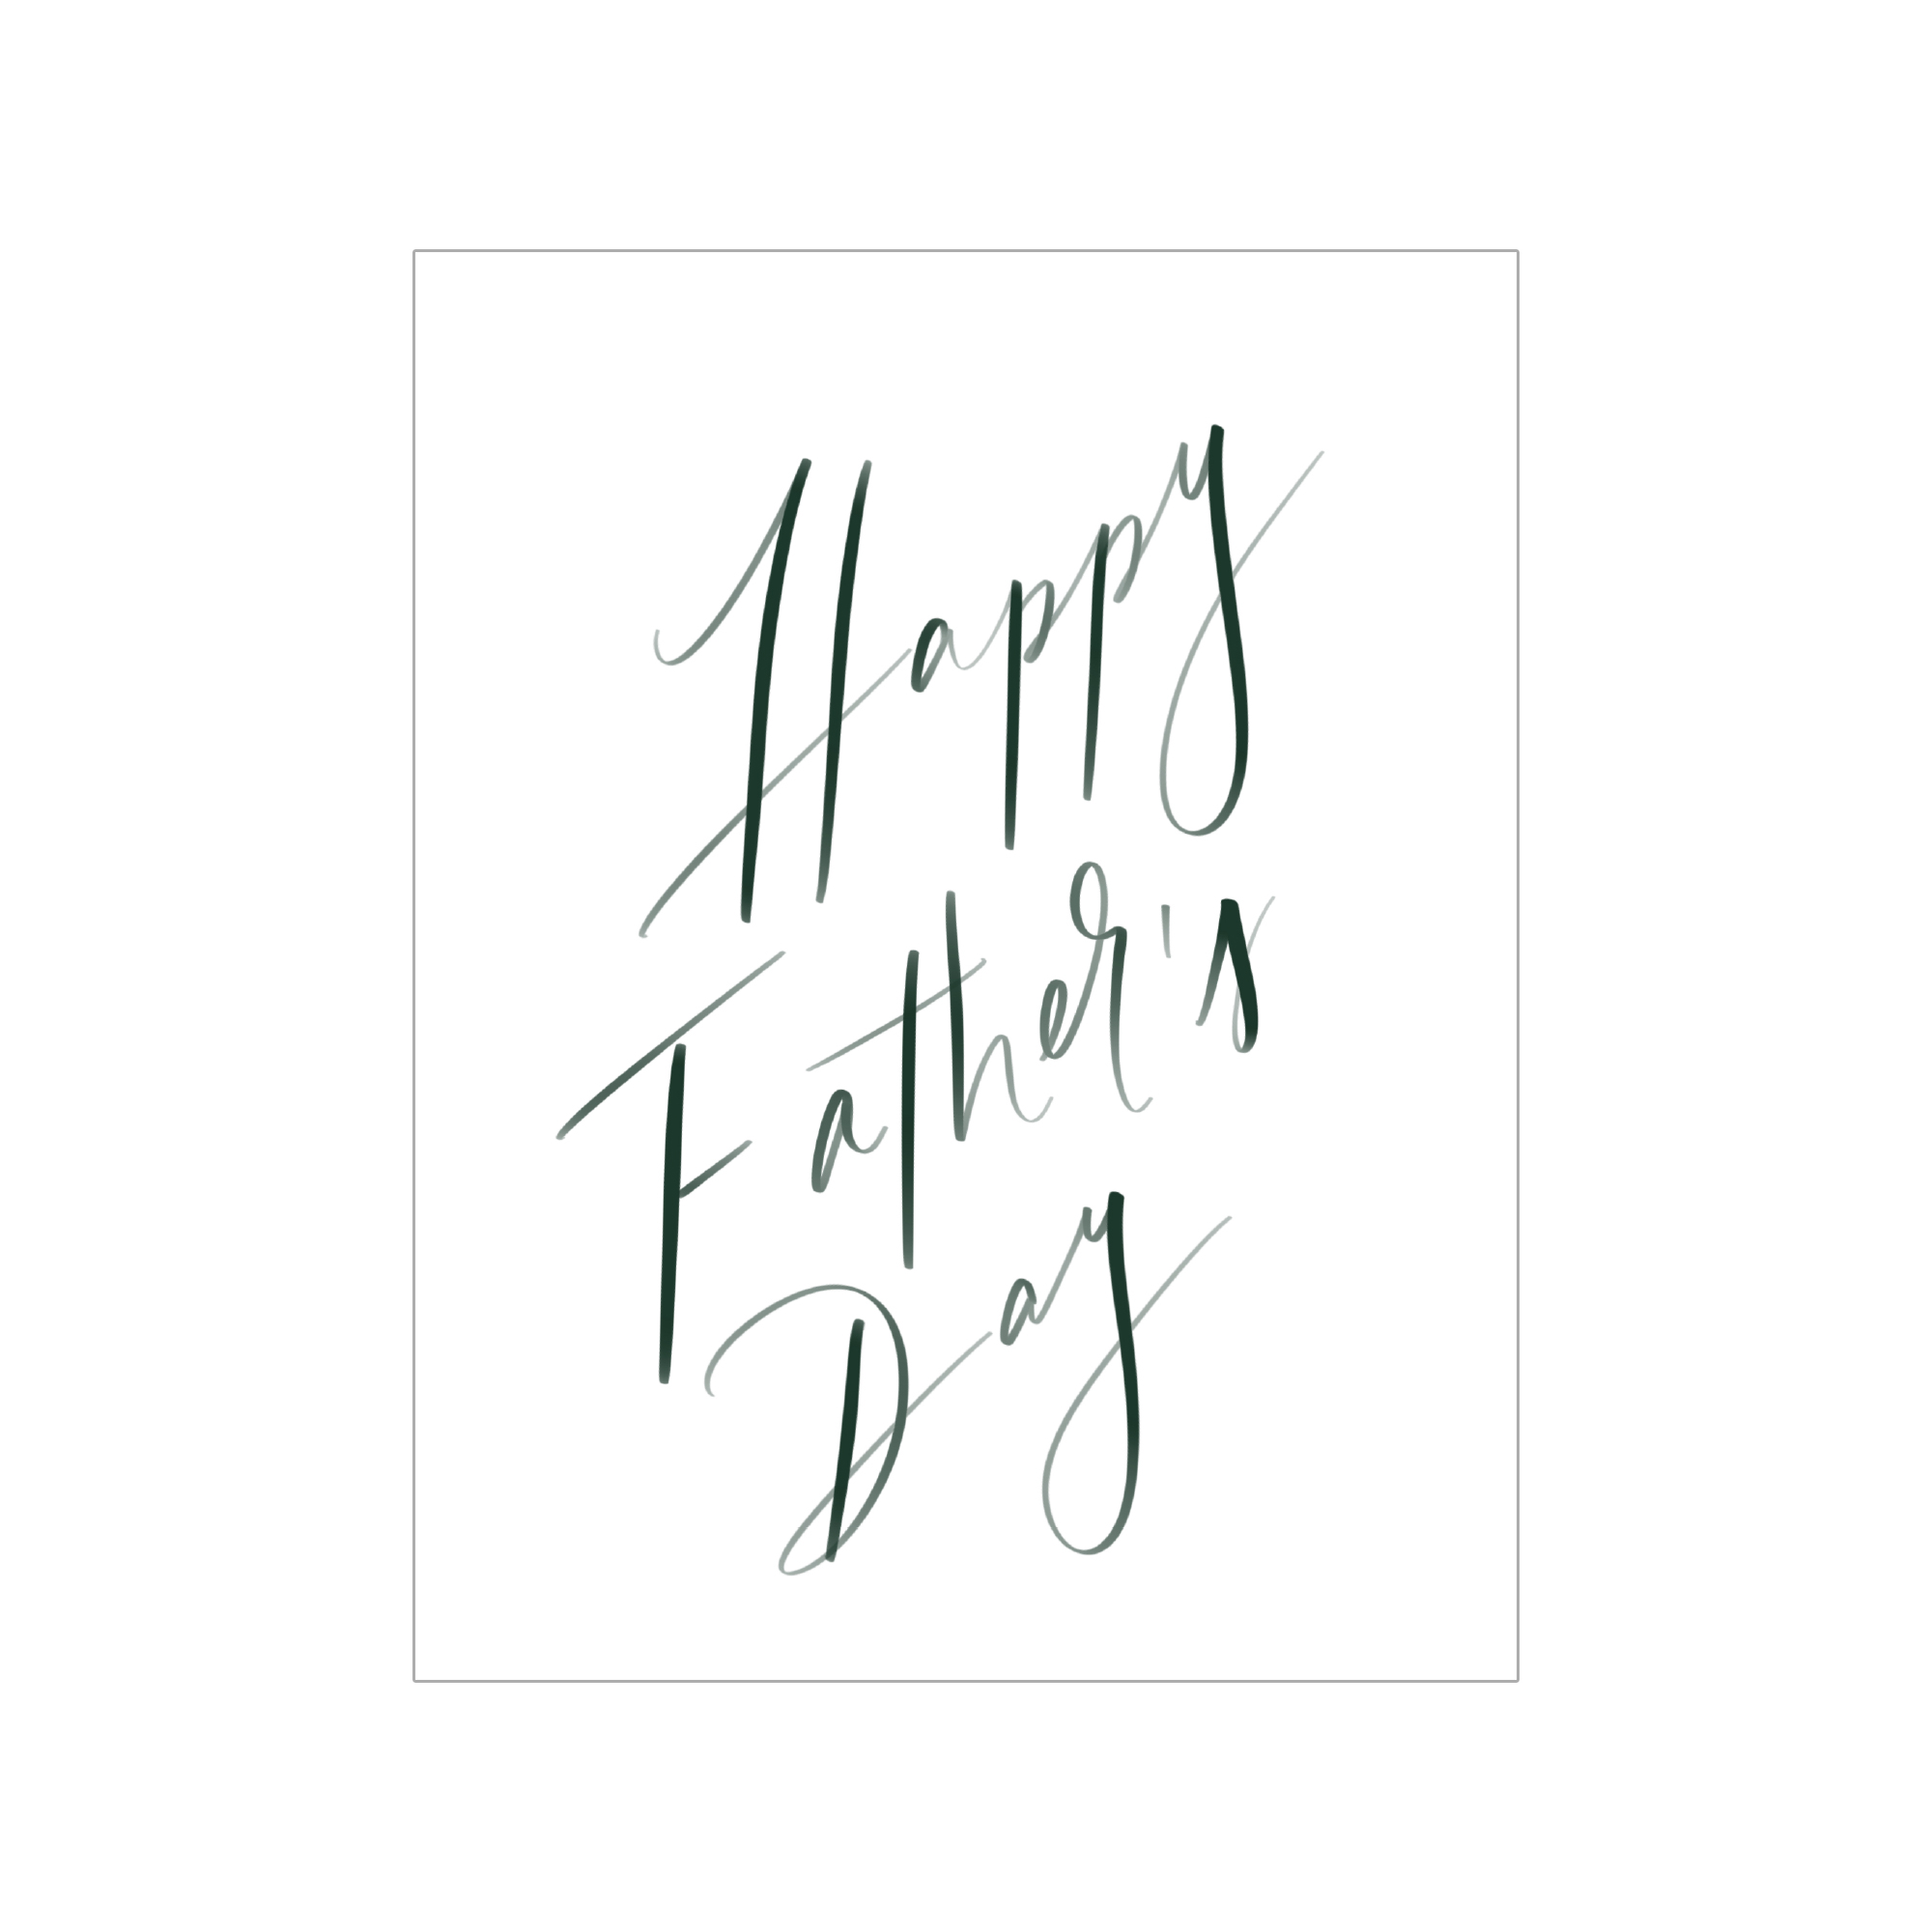 Greeting card; white background with deep olive handwritten text, "Happy Father's Day"